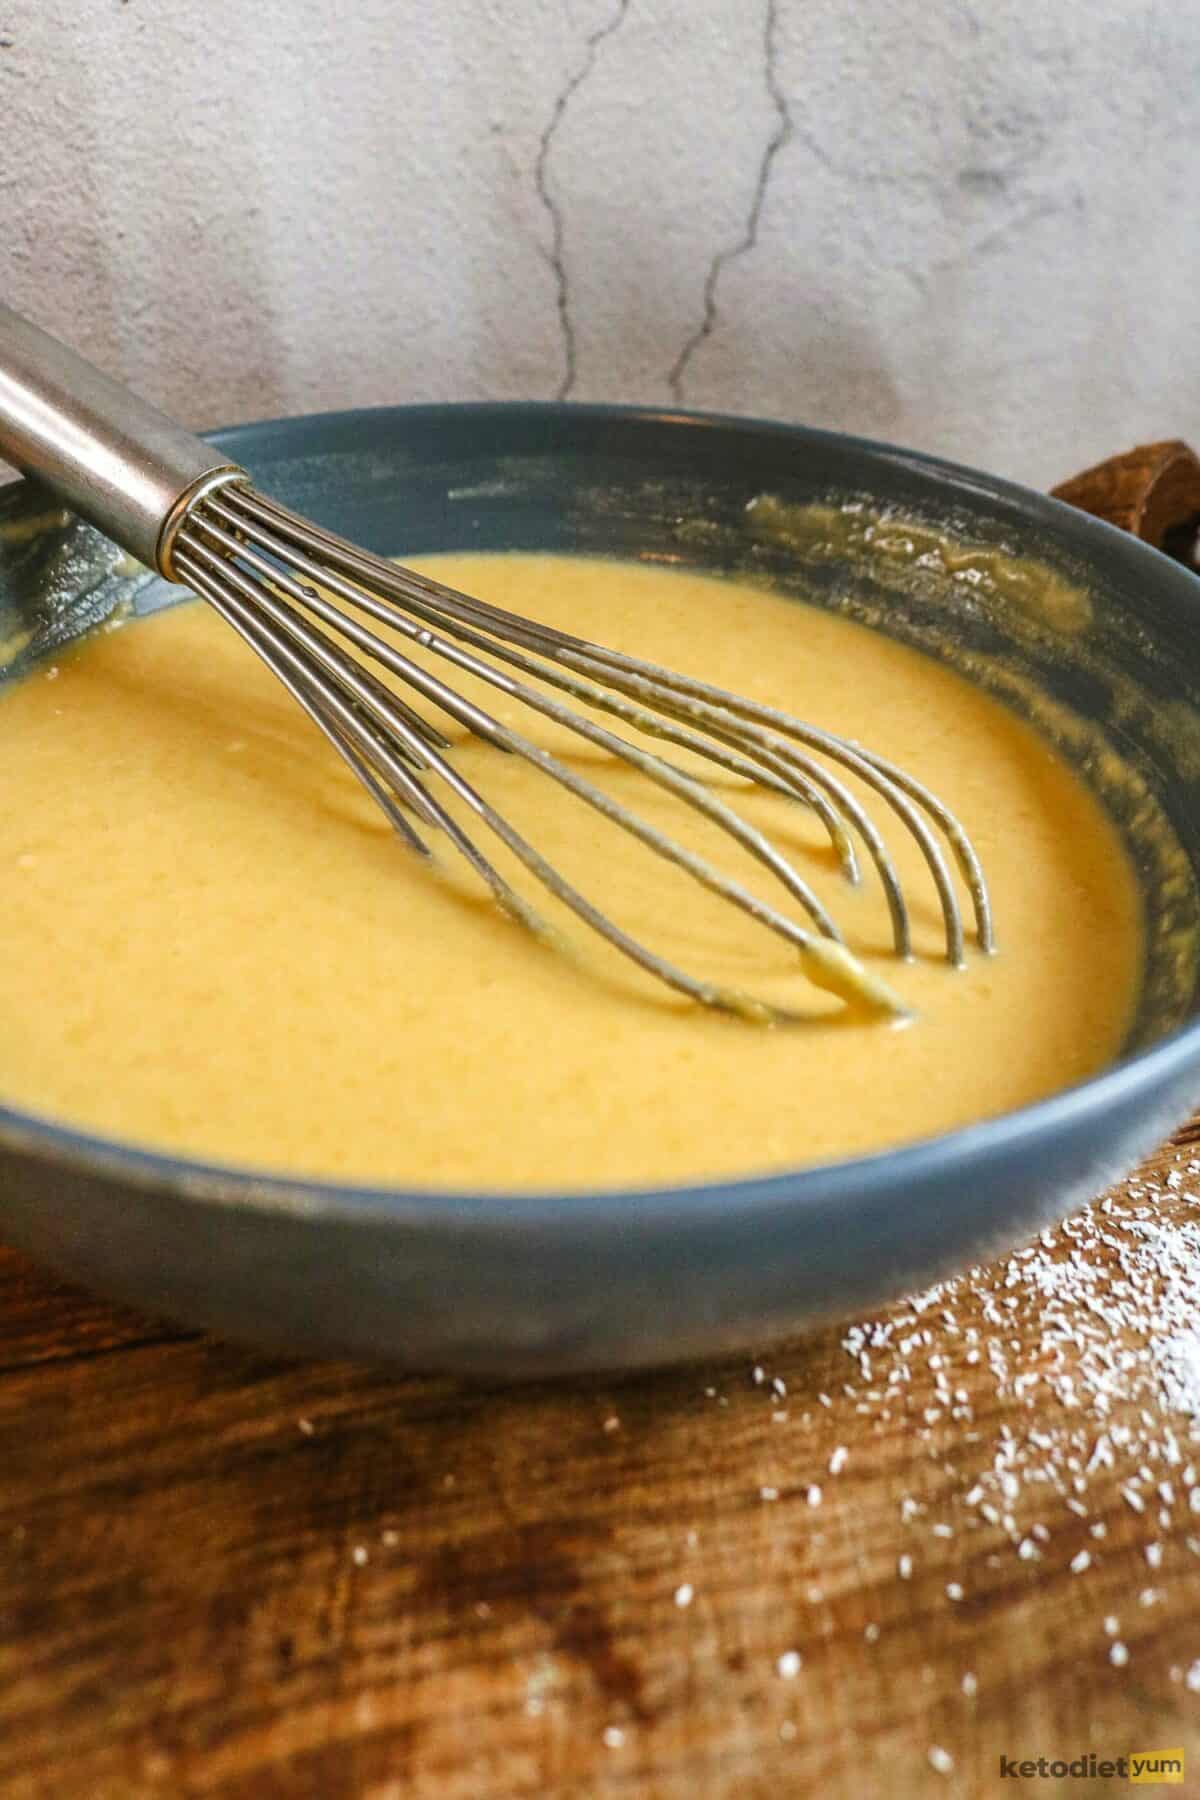 Coconut flour crepe batter in a mixing bowl